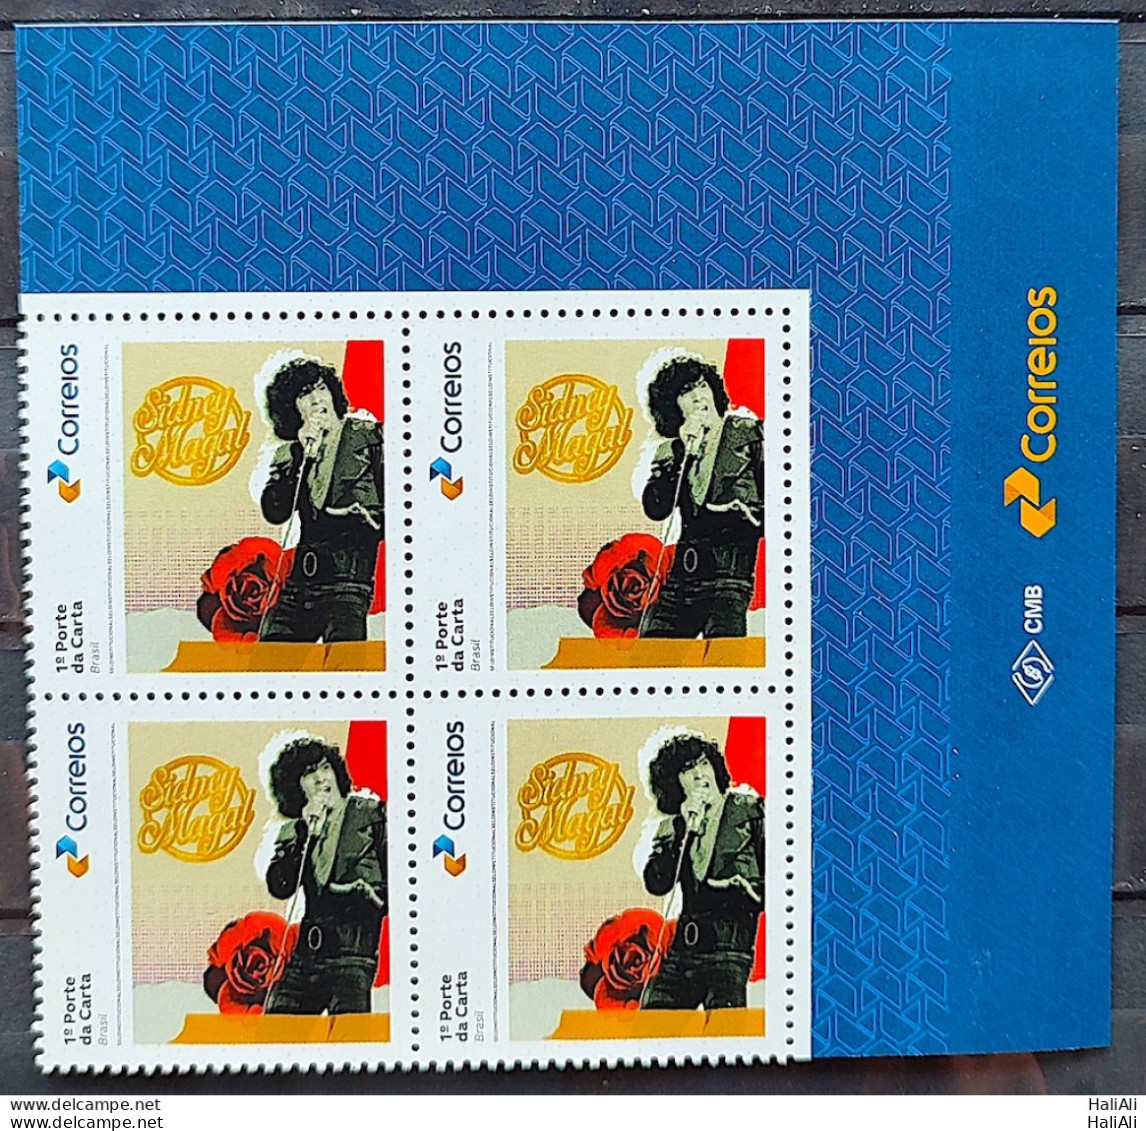 SI 01 Brazil Institutional Stamp Sidney Magal Music 2023 Block Of 4 Vignette Correios - Personalized Stamps